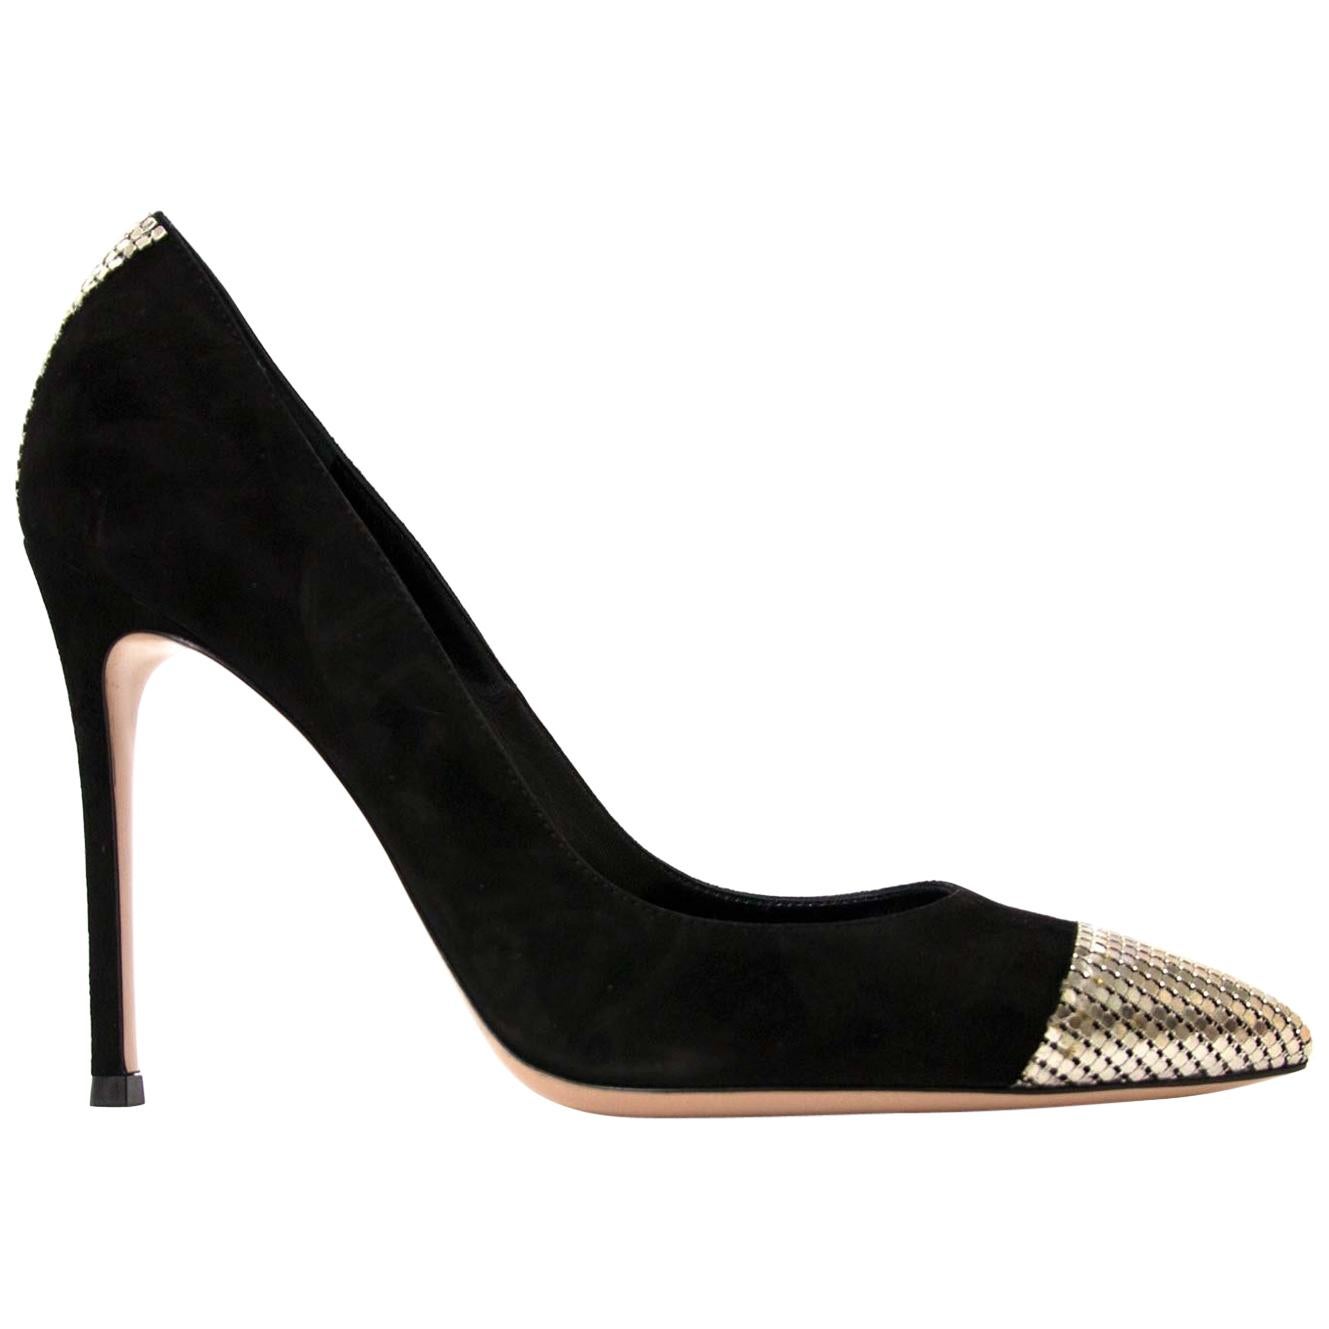 Gianvito Rossi Black Suede Metallic Detail Pumps - size 37.5 For Sale